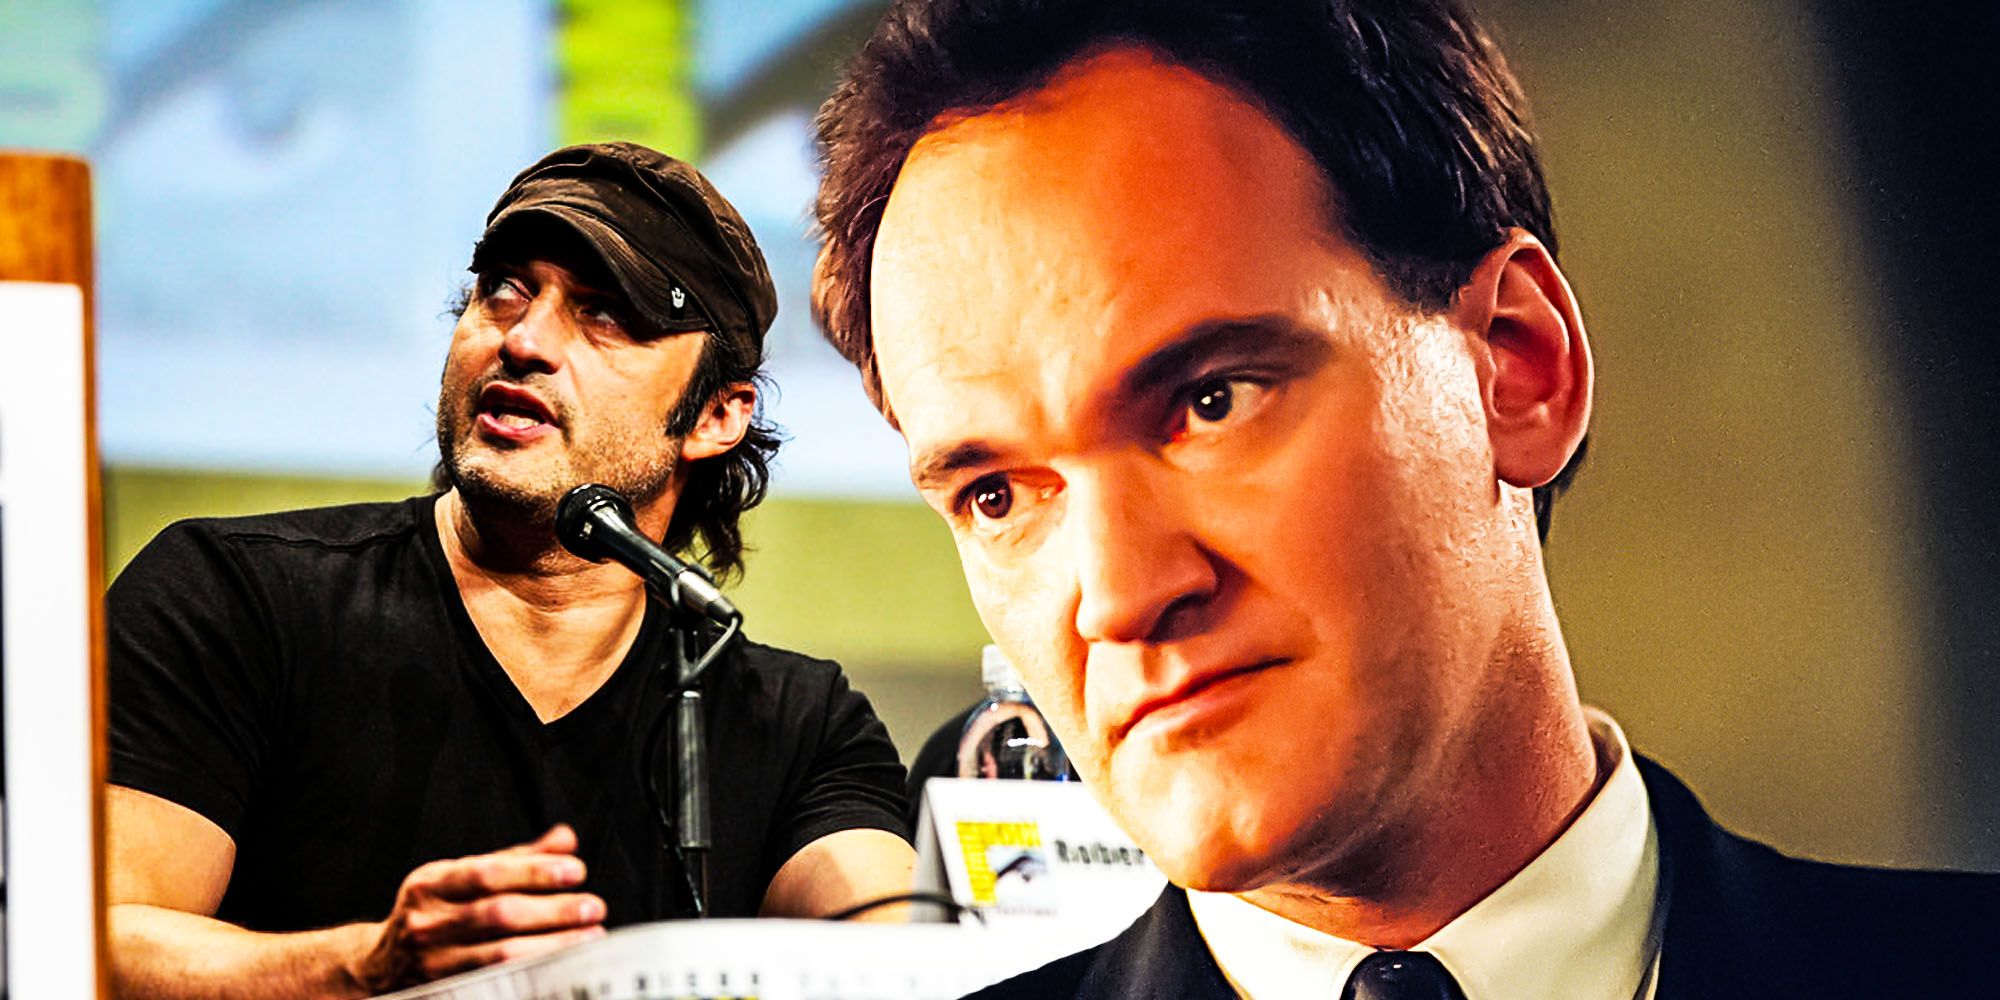 Quentin Tarantino shared universe connected to Robert Rodriguez movies